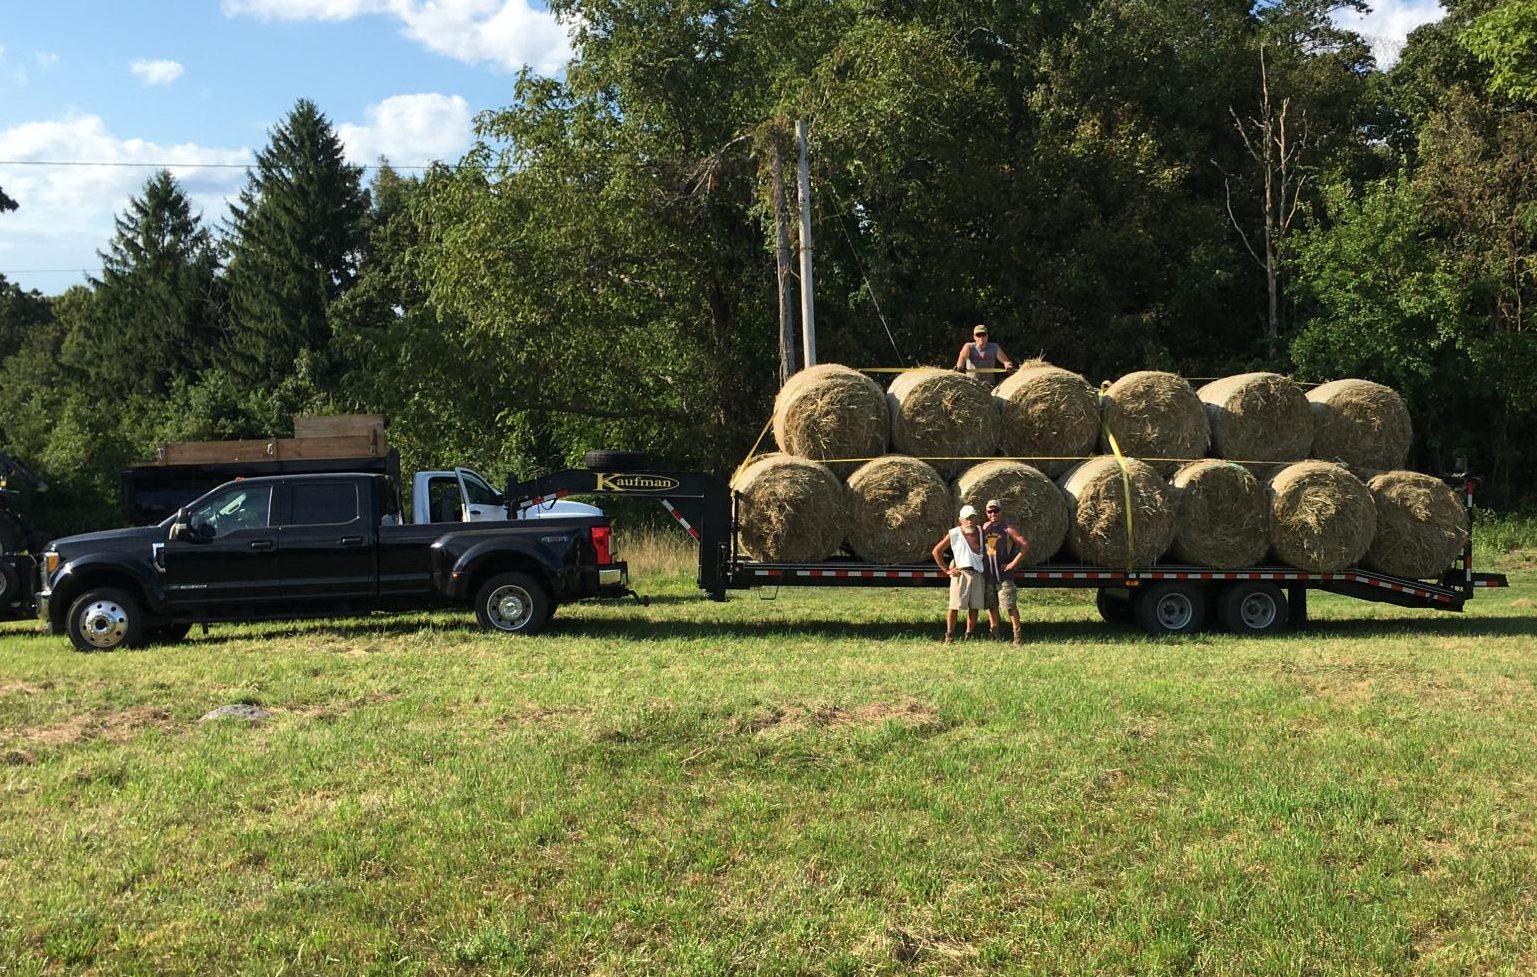 Mykal Kuslis poses on his family farm with a trailer load of hay bales. The farm, which has been in his family for nearly a century, sells hay to local farmers. (Courtesy of Mykal Kuslis)